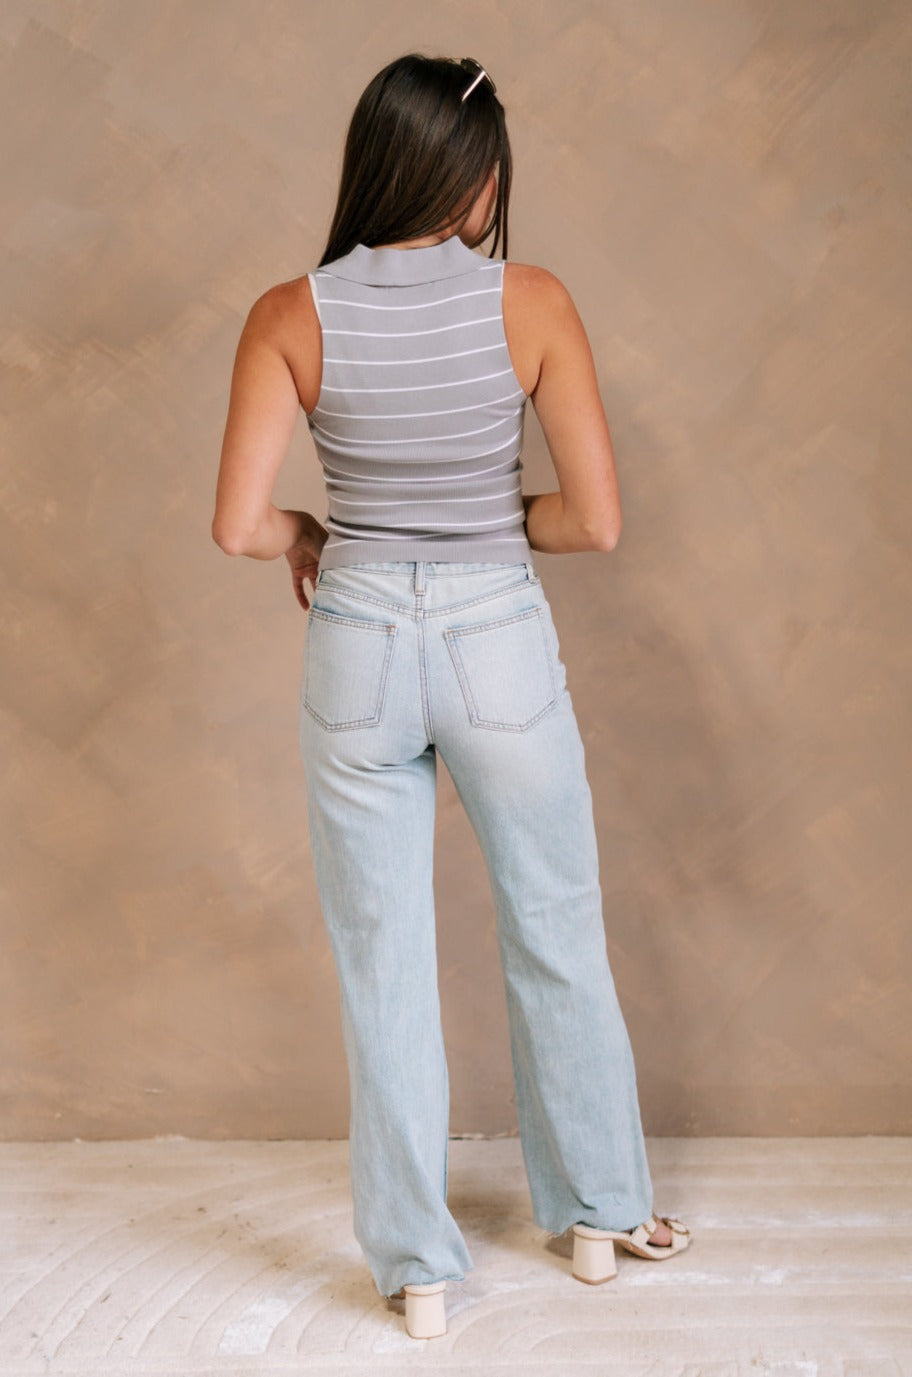 Full body back view of female model wearing the Amanda Light Wash Distressed Jeans that have light wash denim, distressing, a high waist, and wide straight legs. Worn with gray top.